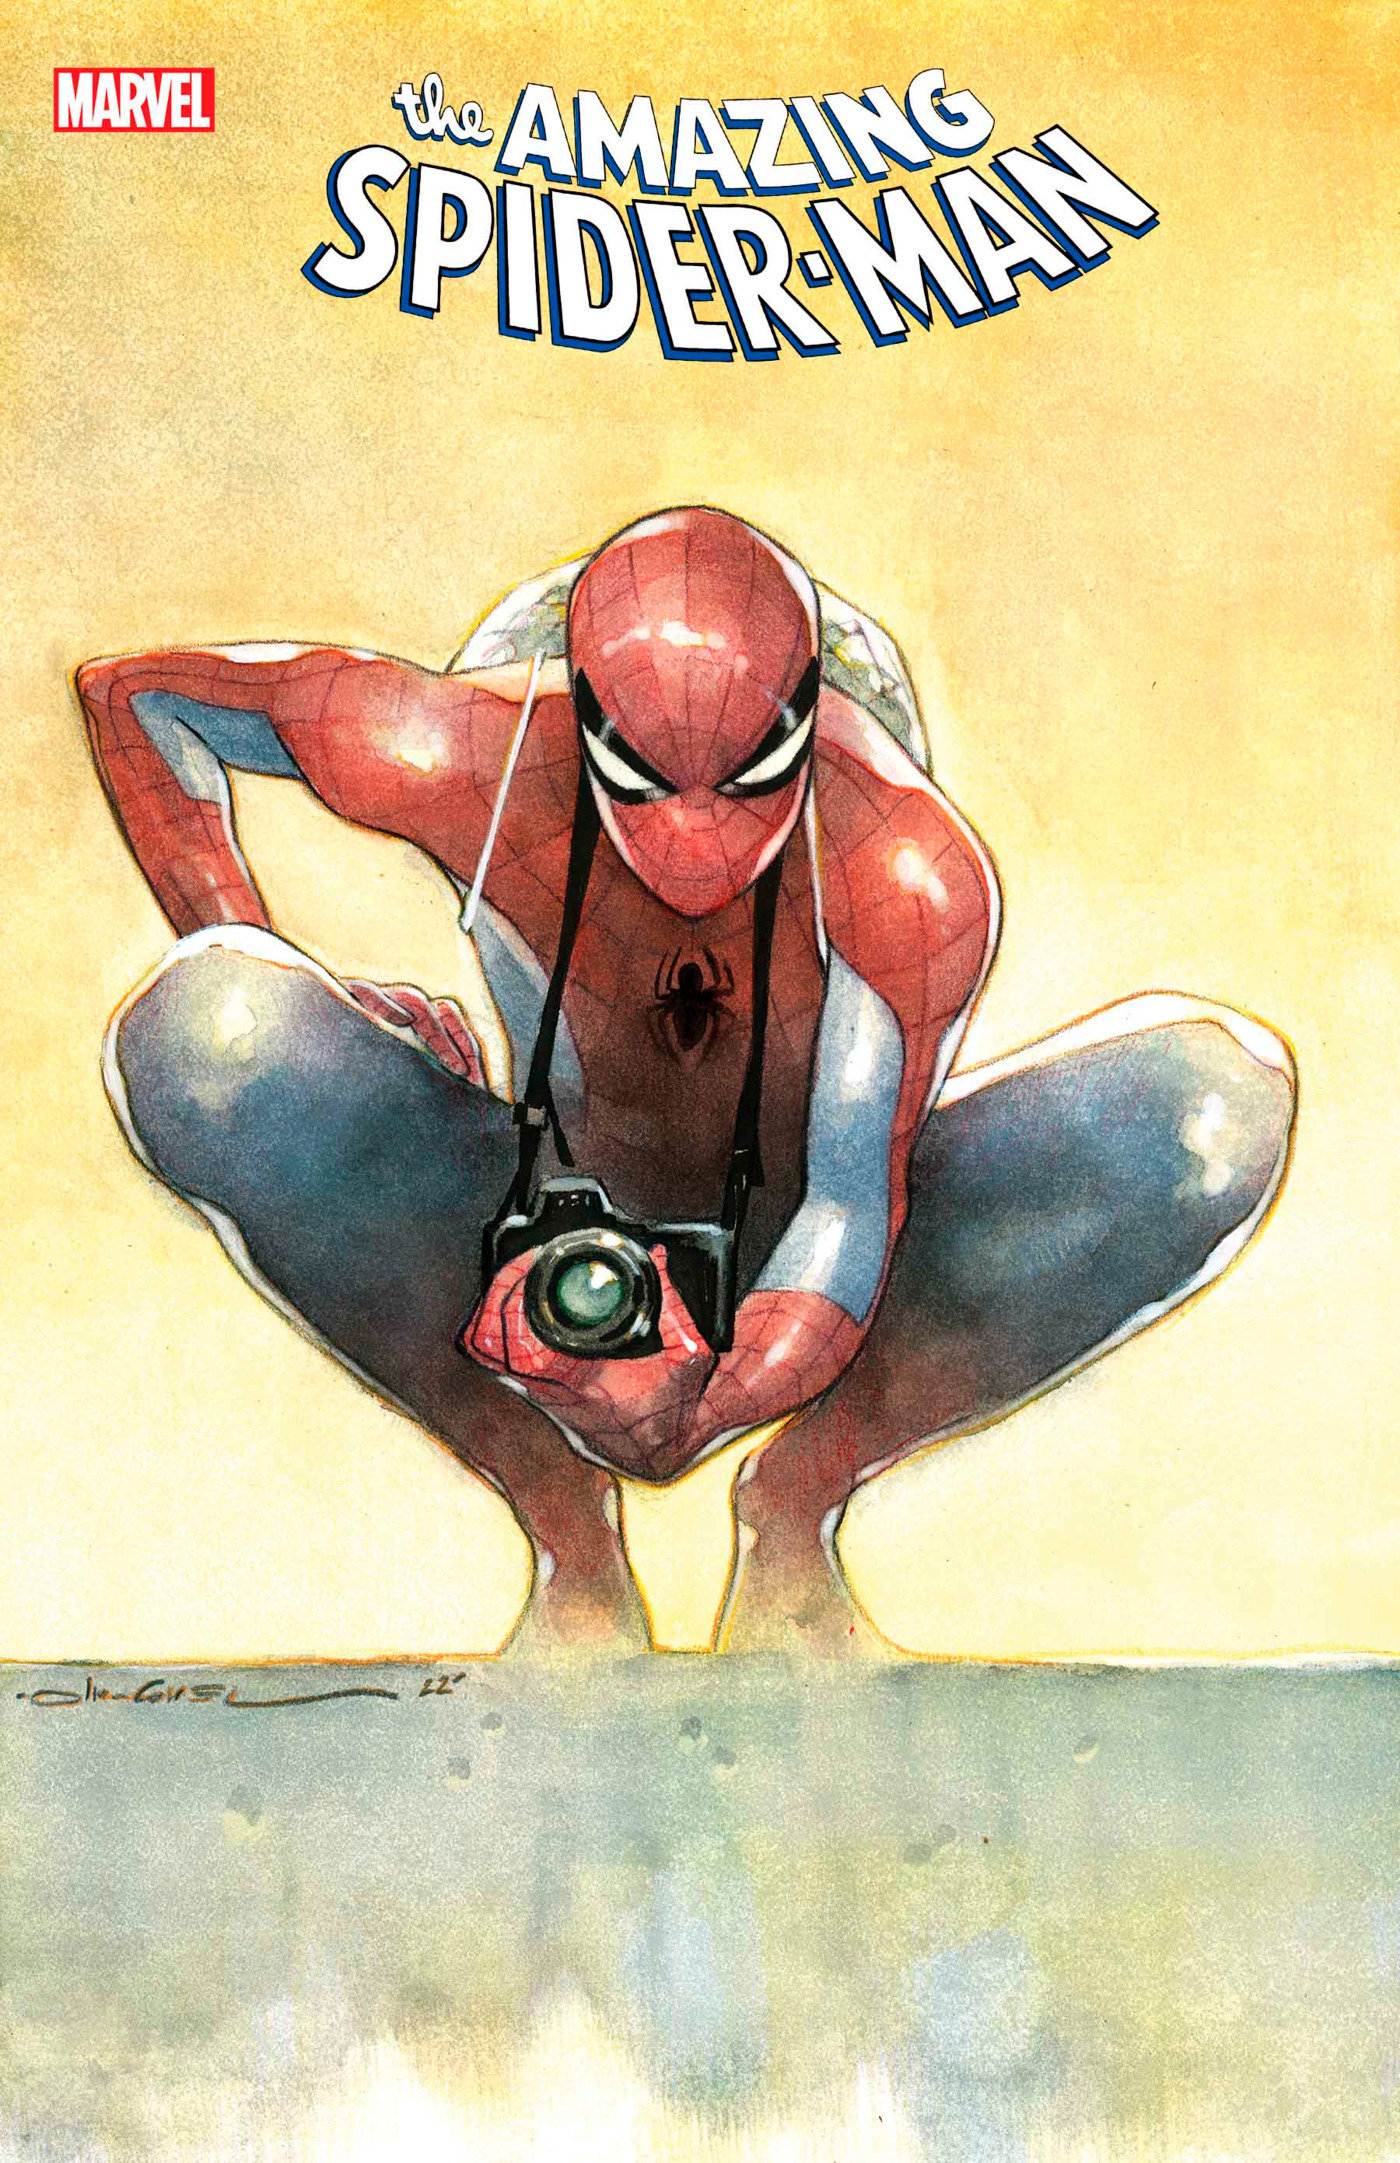 Amazing Spider-Man #28 1 for 50 Incentive Olivier Coipel Variant